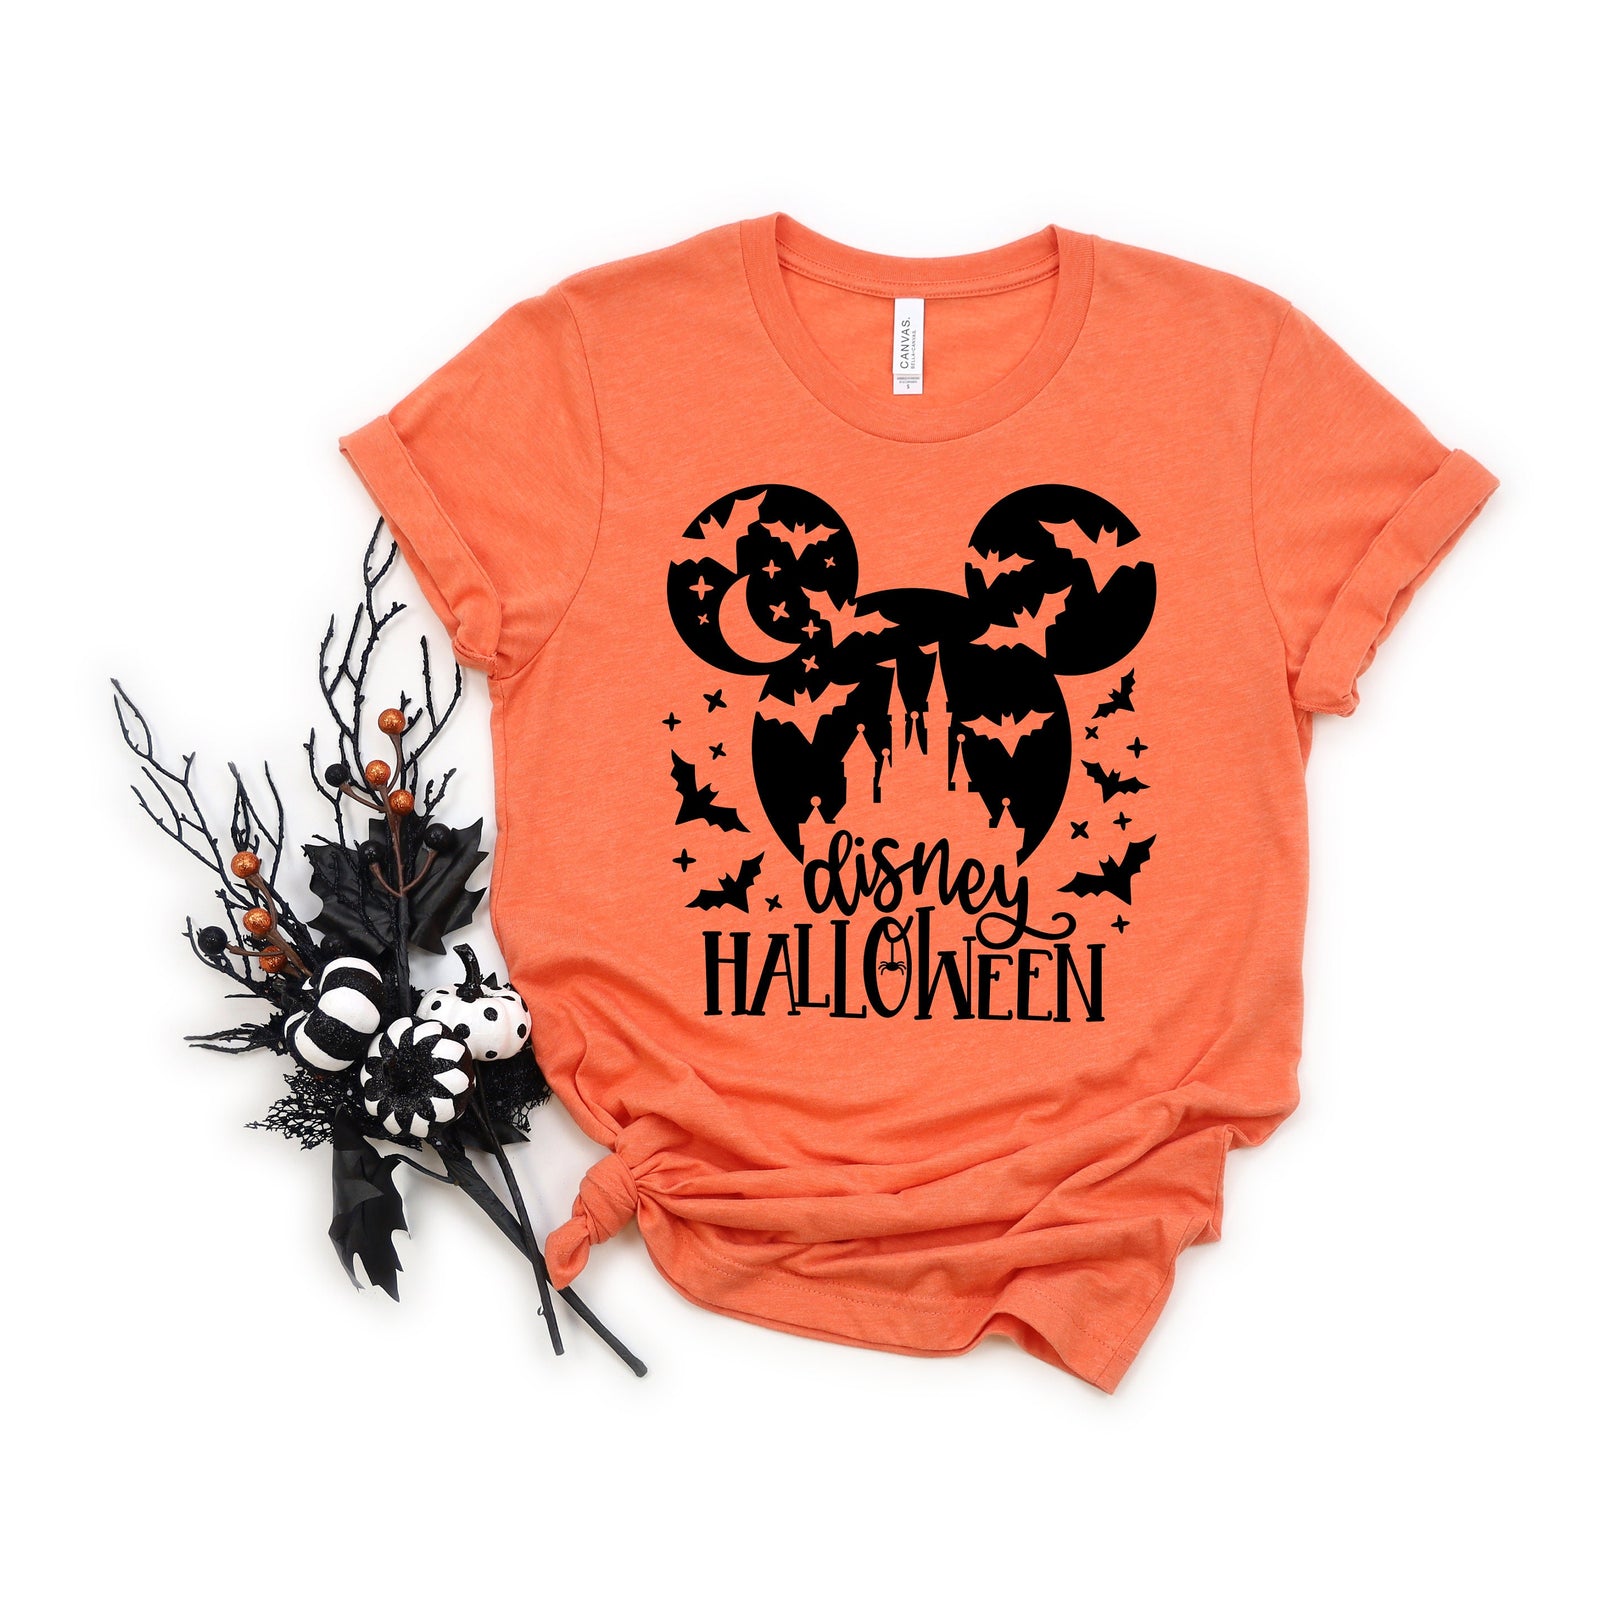 Disney Halloween - Mickey Mouse adult unisex shirt - Trick or Treat - Not So Scary